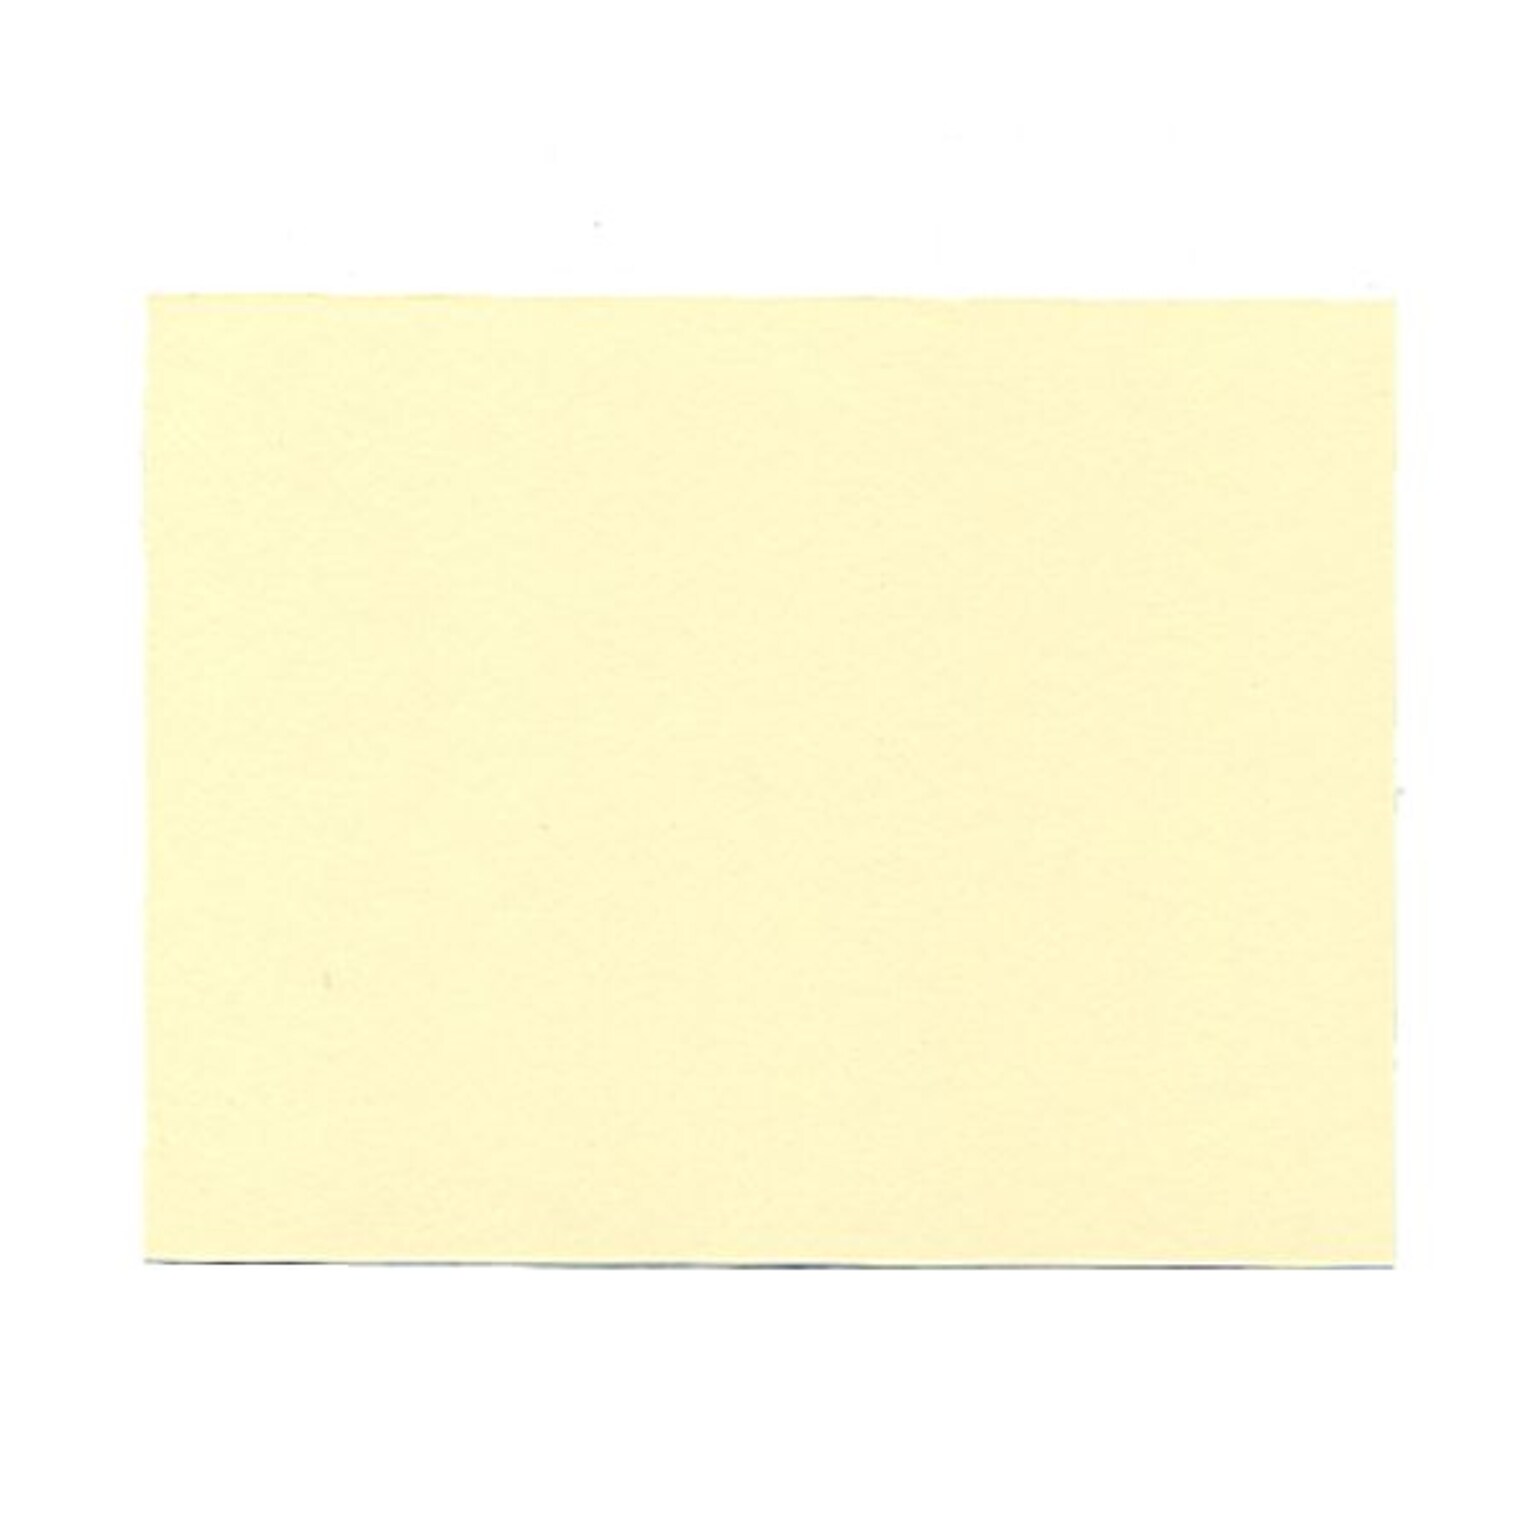 JAM Paper® Blank Note Cards, A2 size, 4.25 x 5.5, Ivory, 100/pack (175971)